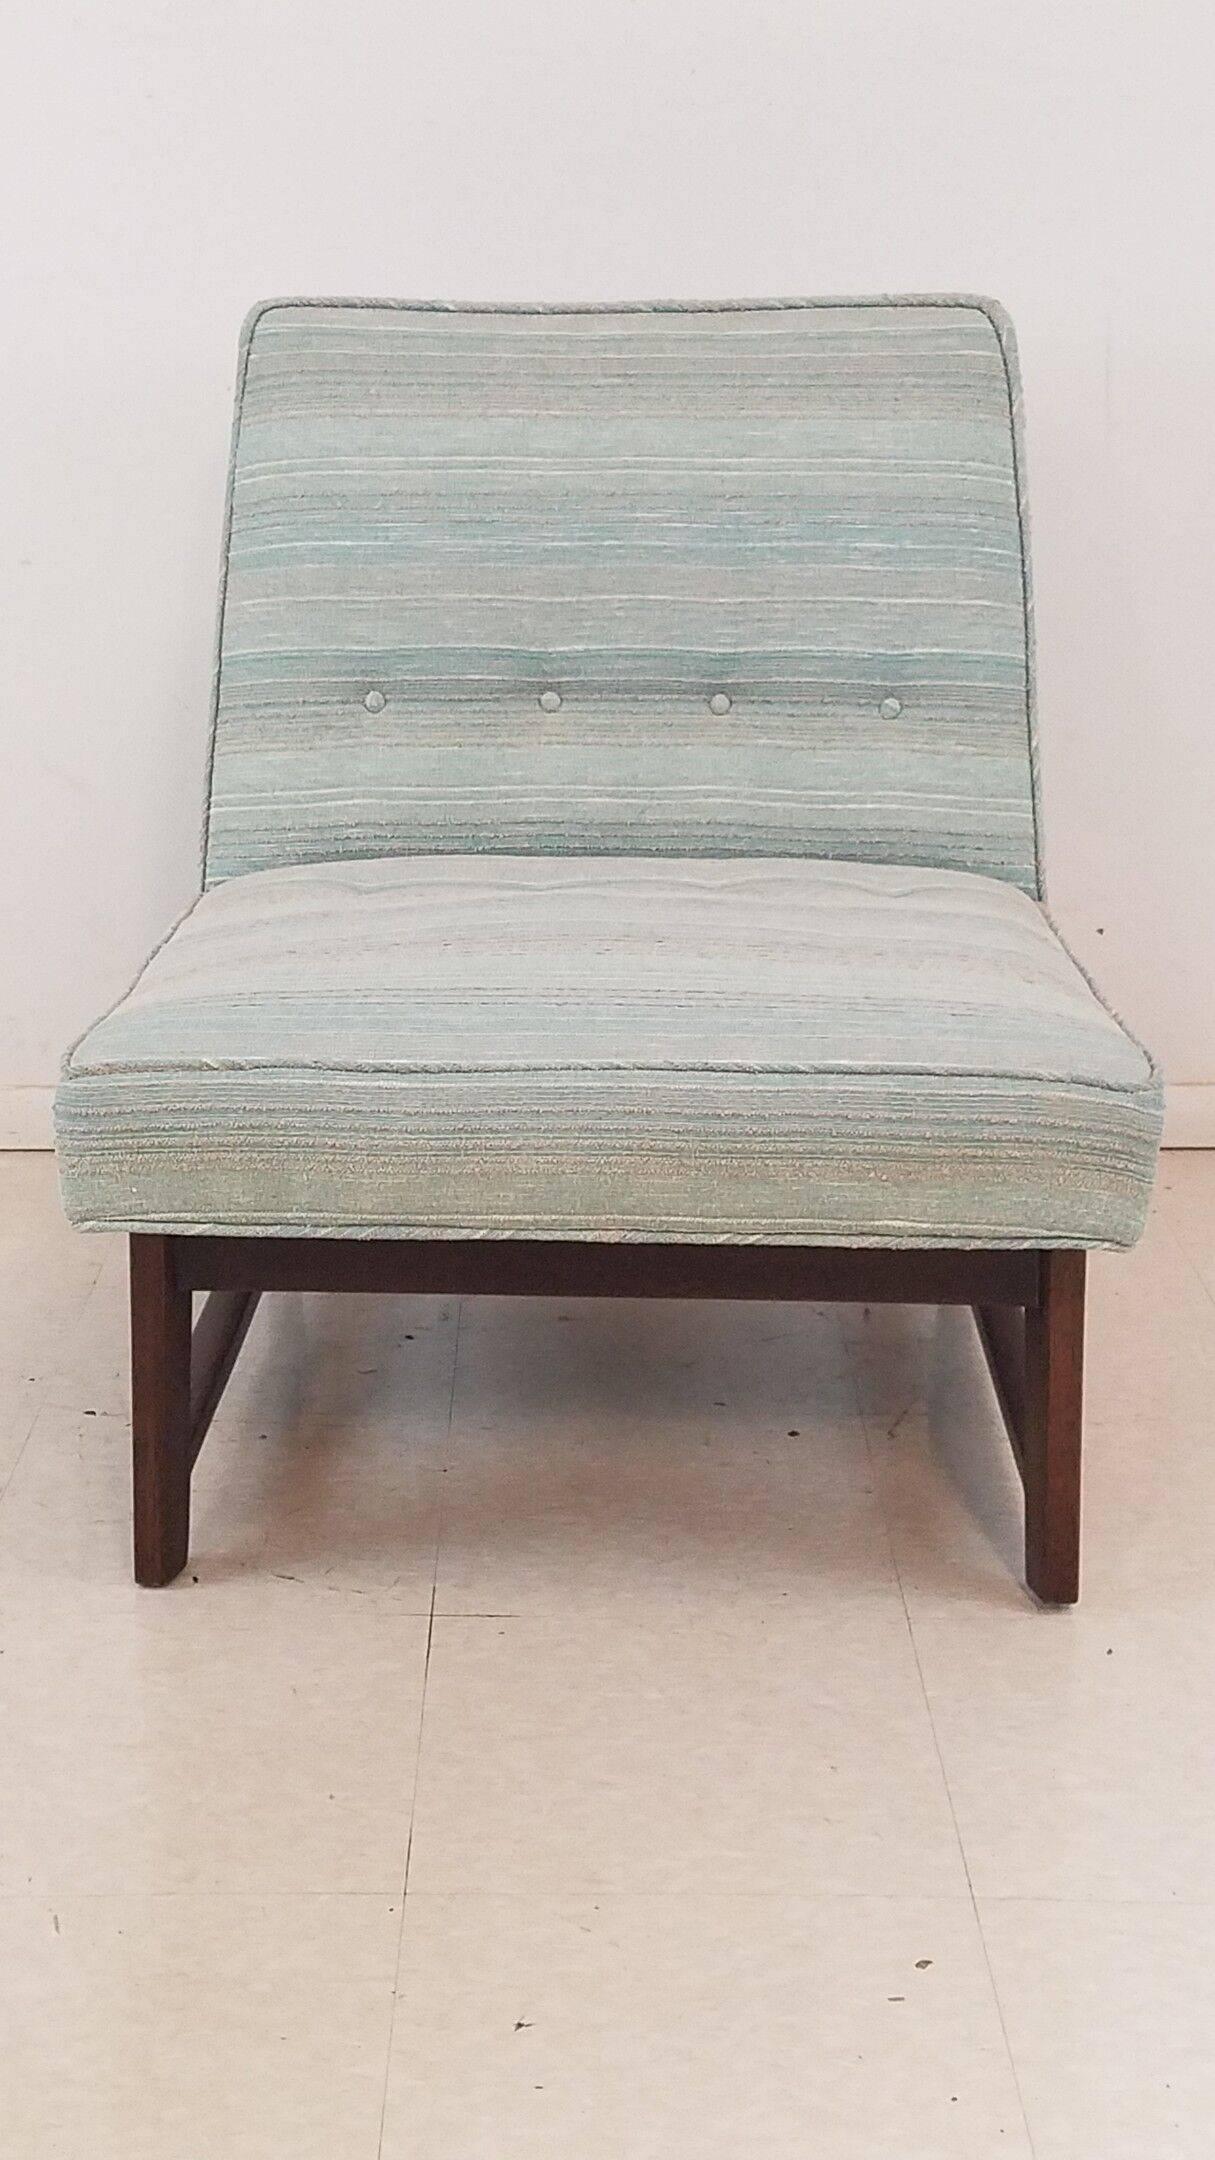 American Pair of Mid-Century Modern Slipper Chairs by Edward Wormley for Dunbar